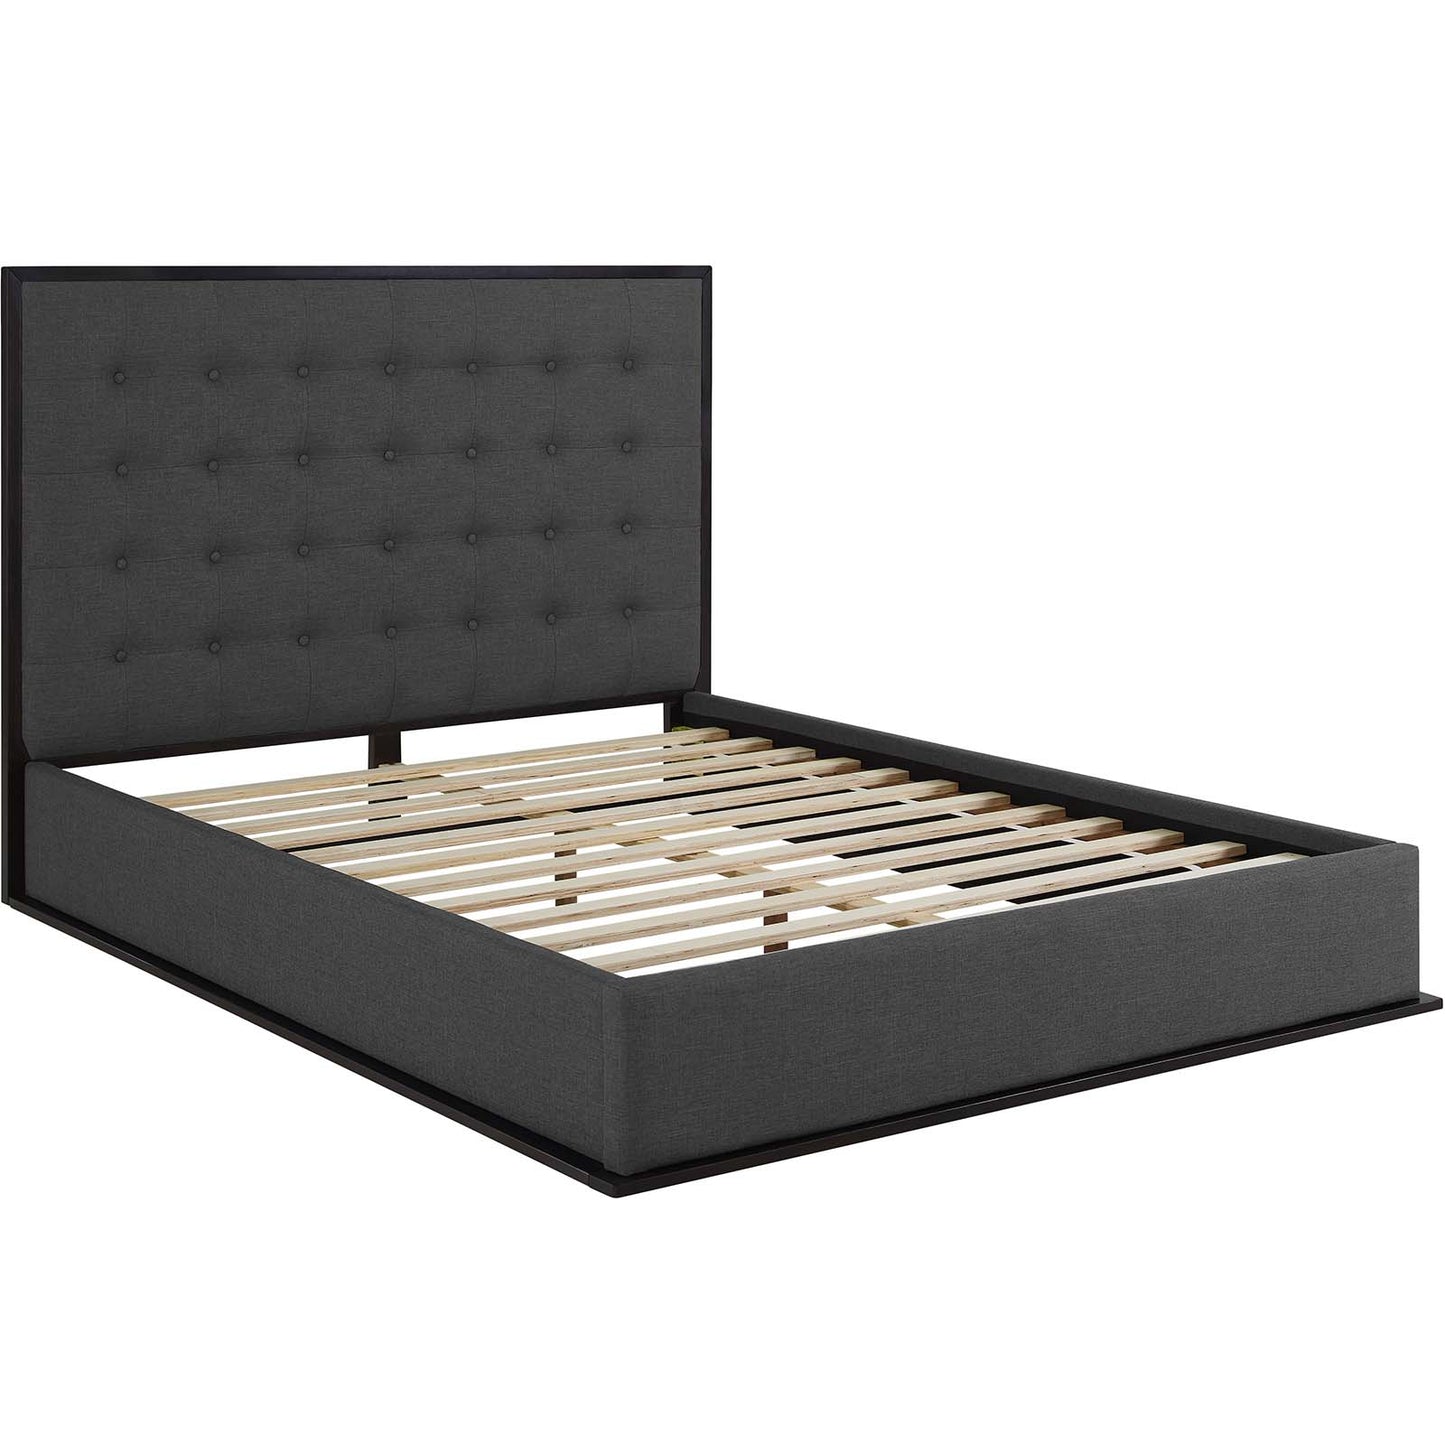 Madeline Queen Upholstered Fabric Bed Frame By Modway - MOD-5499